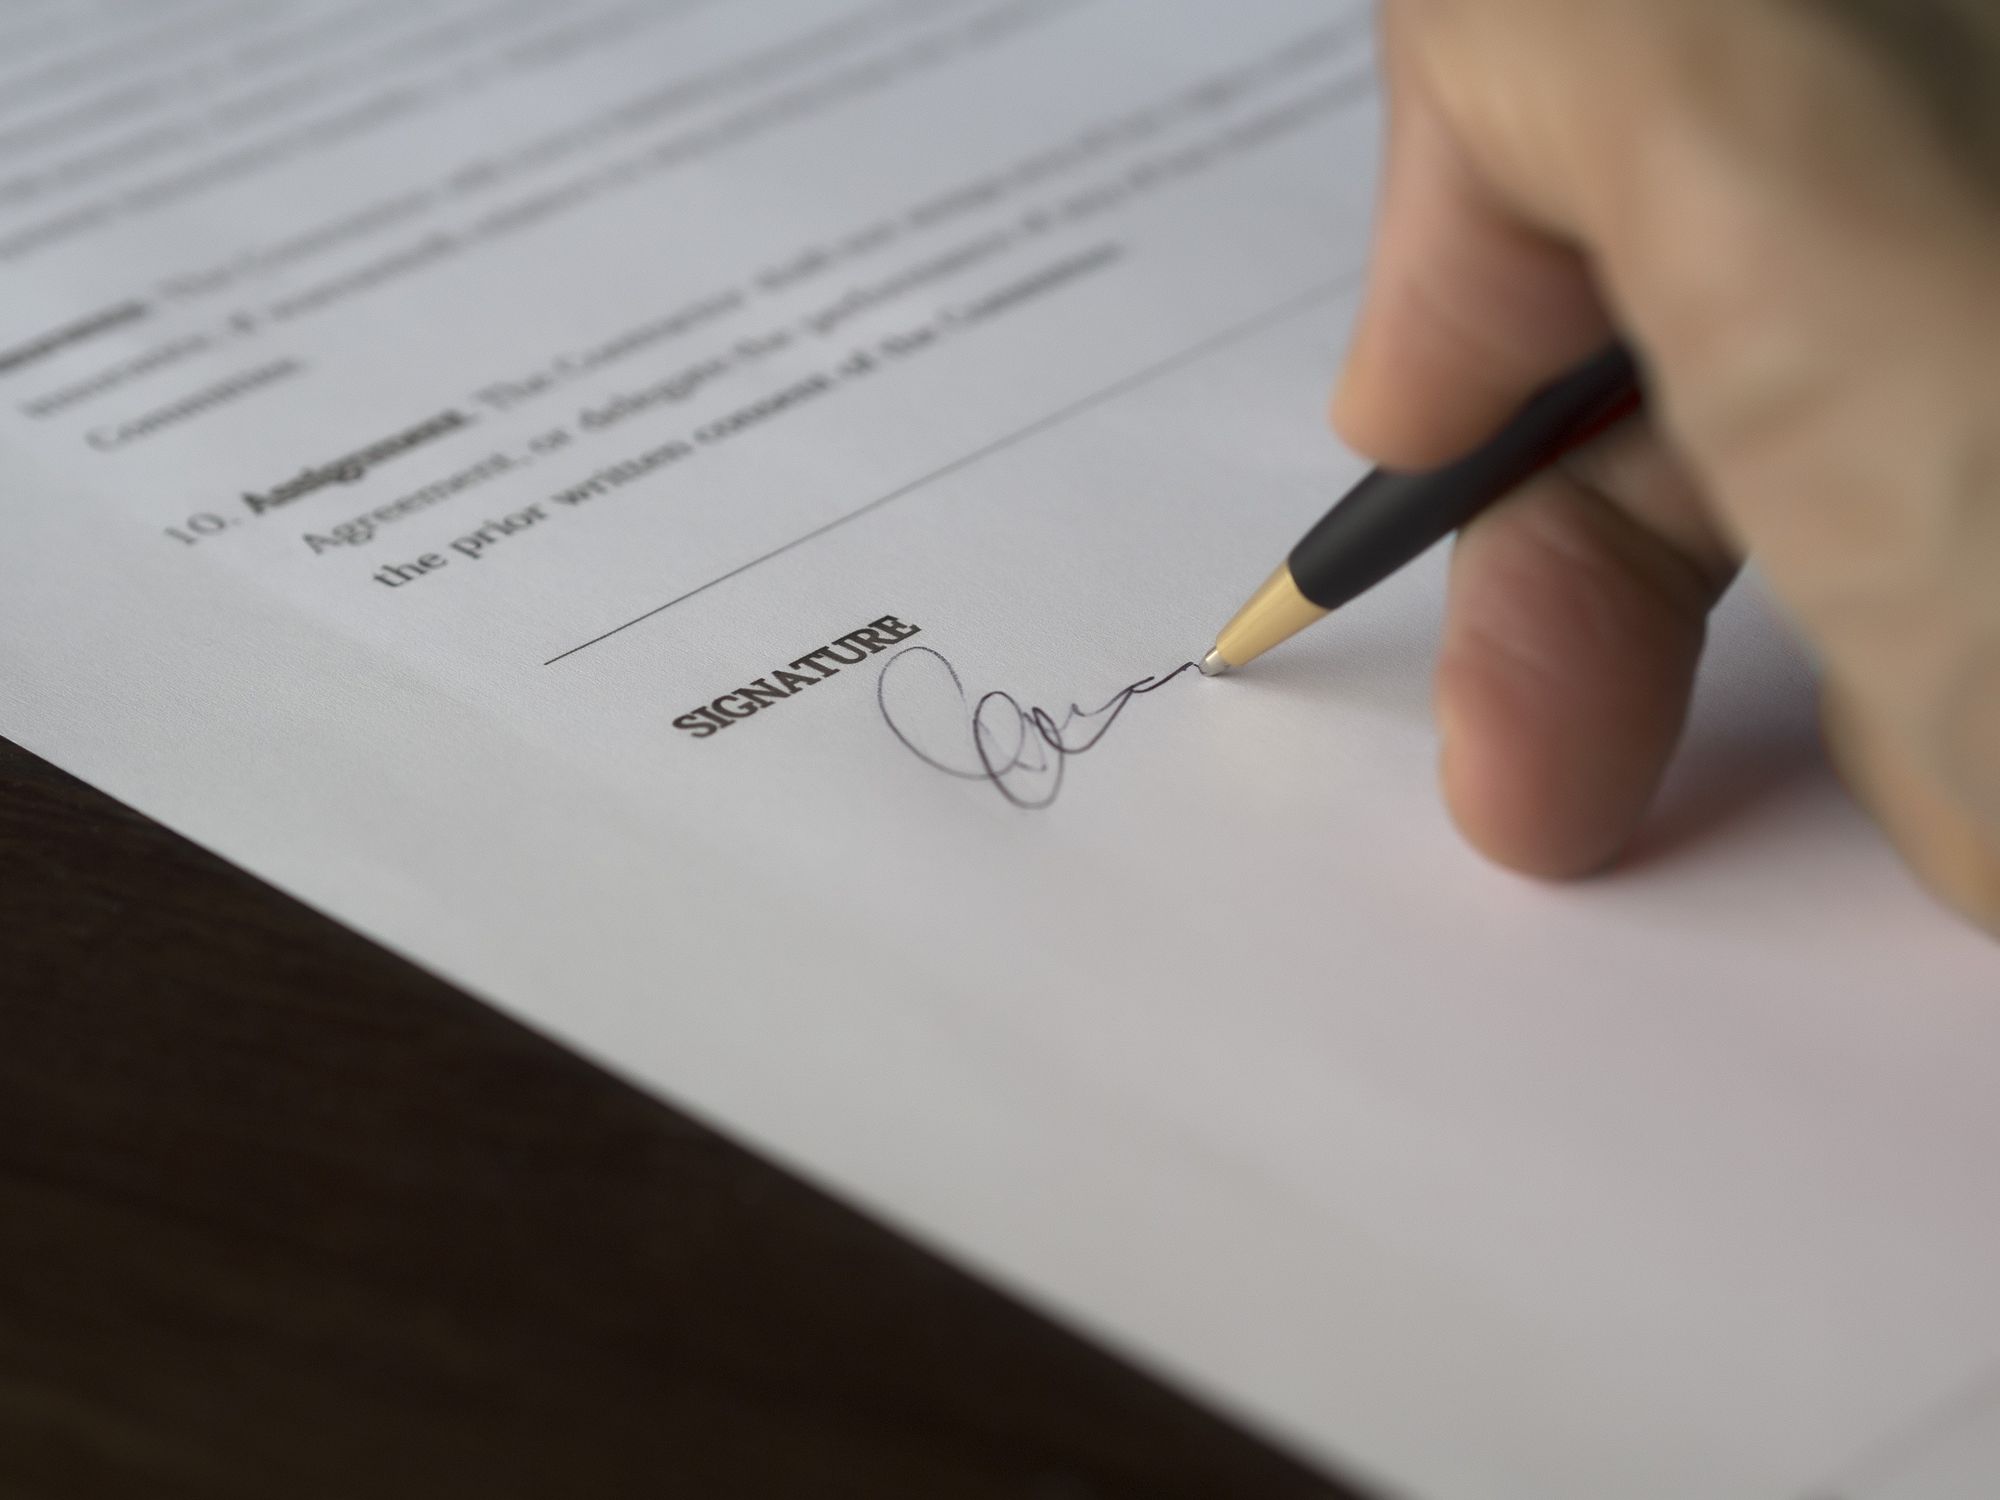 Sign anti-harassment forms before joining the company